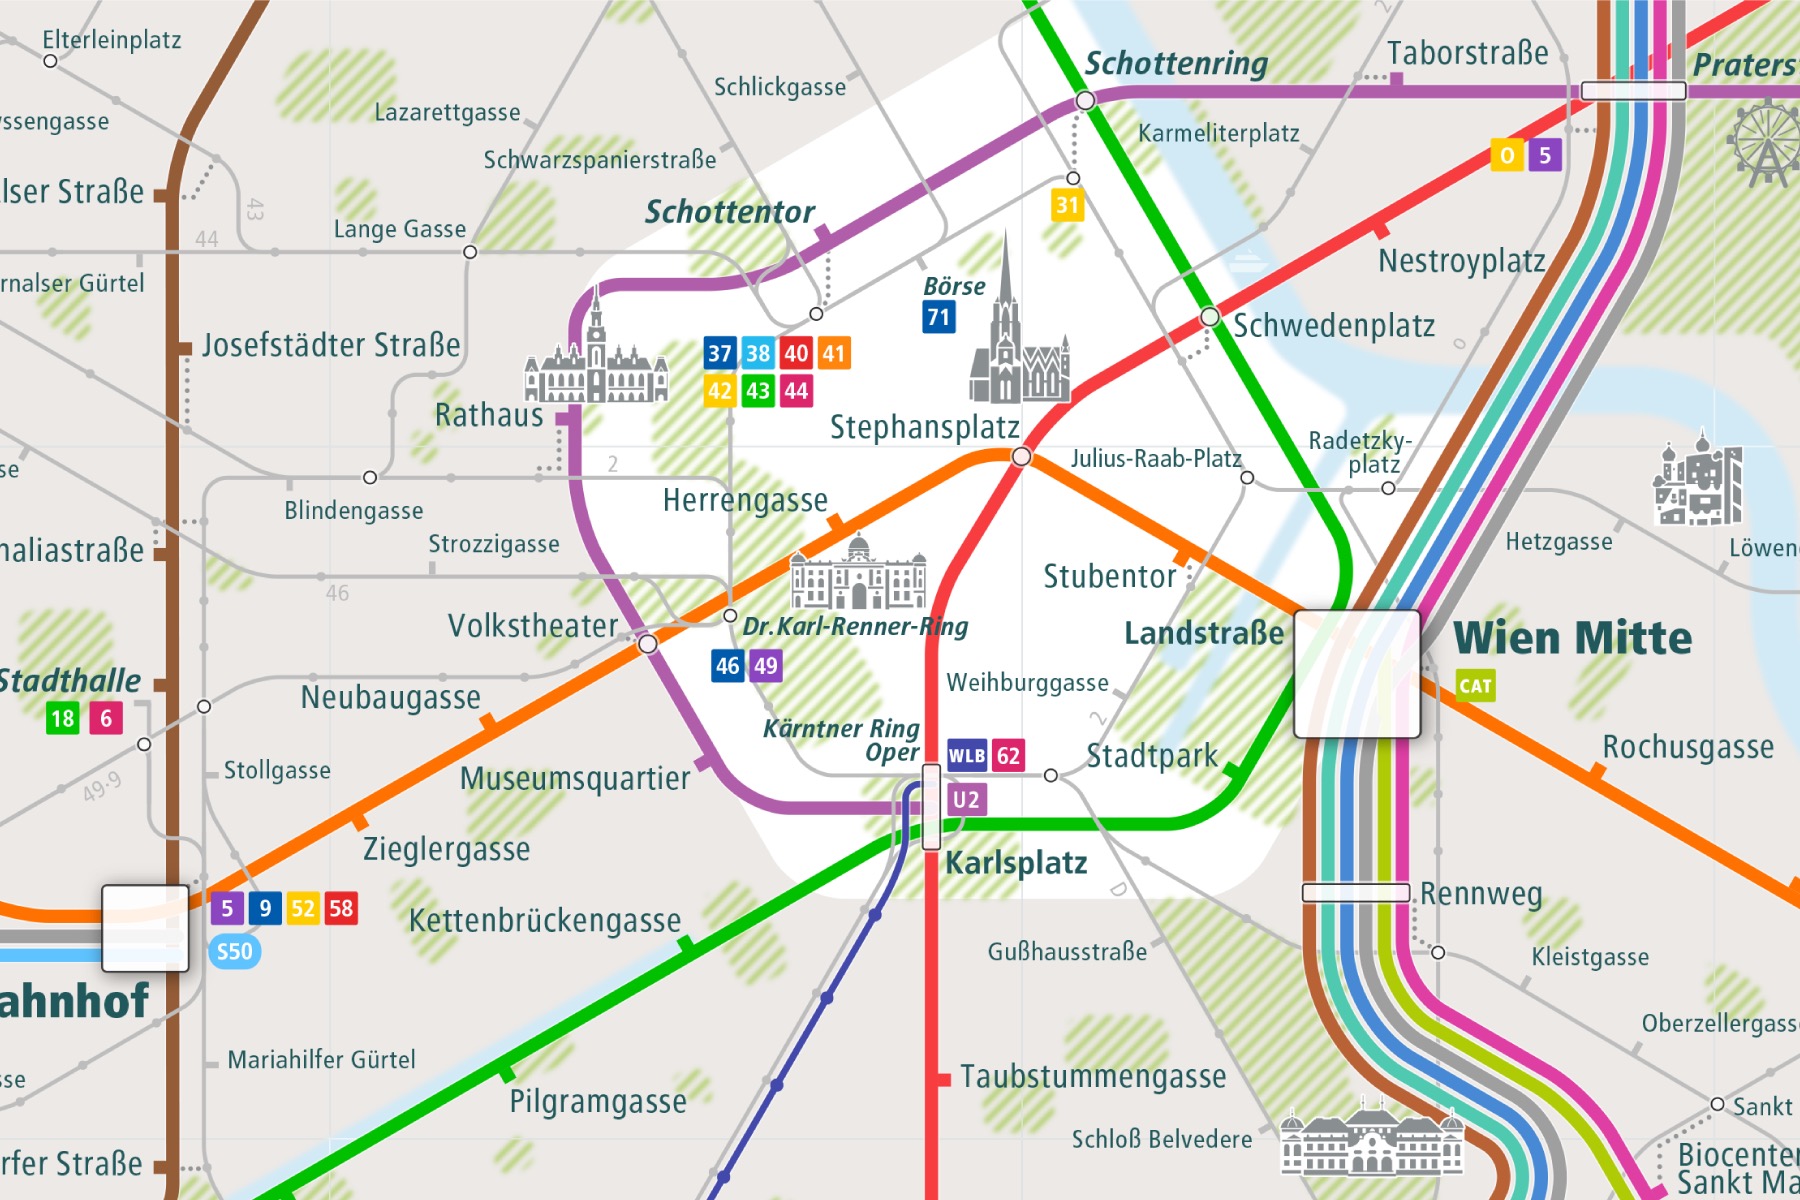 Vienna City Rail Map shows the train and public transportation routes of U-Bahn, metro, tram, commuter train - Close-Up